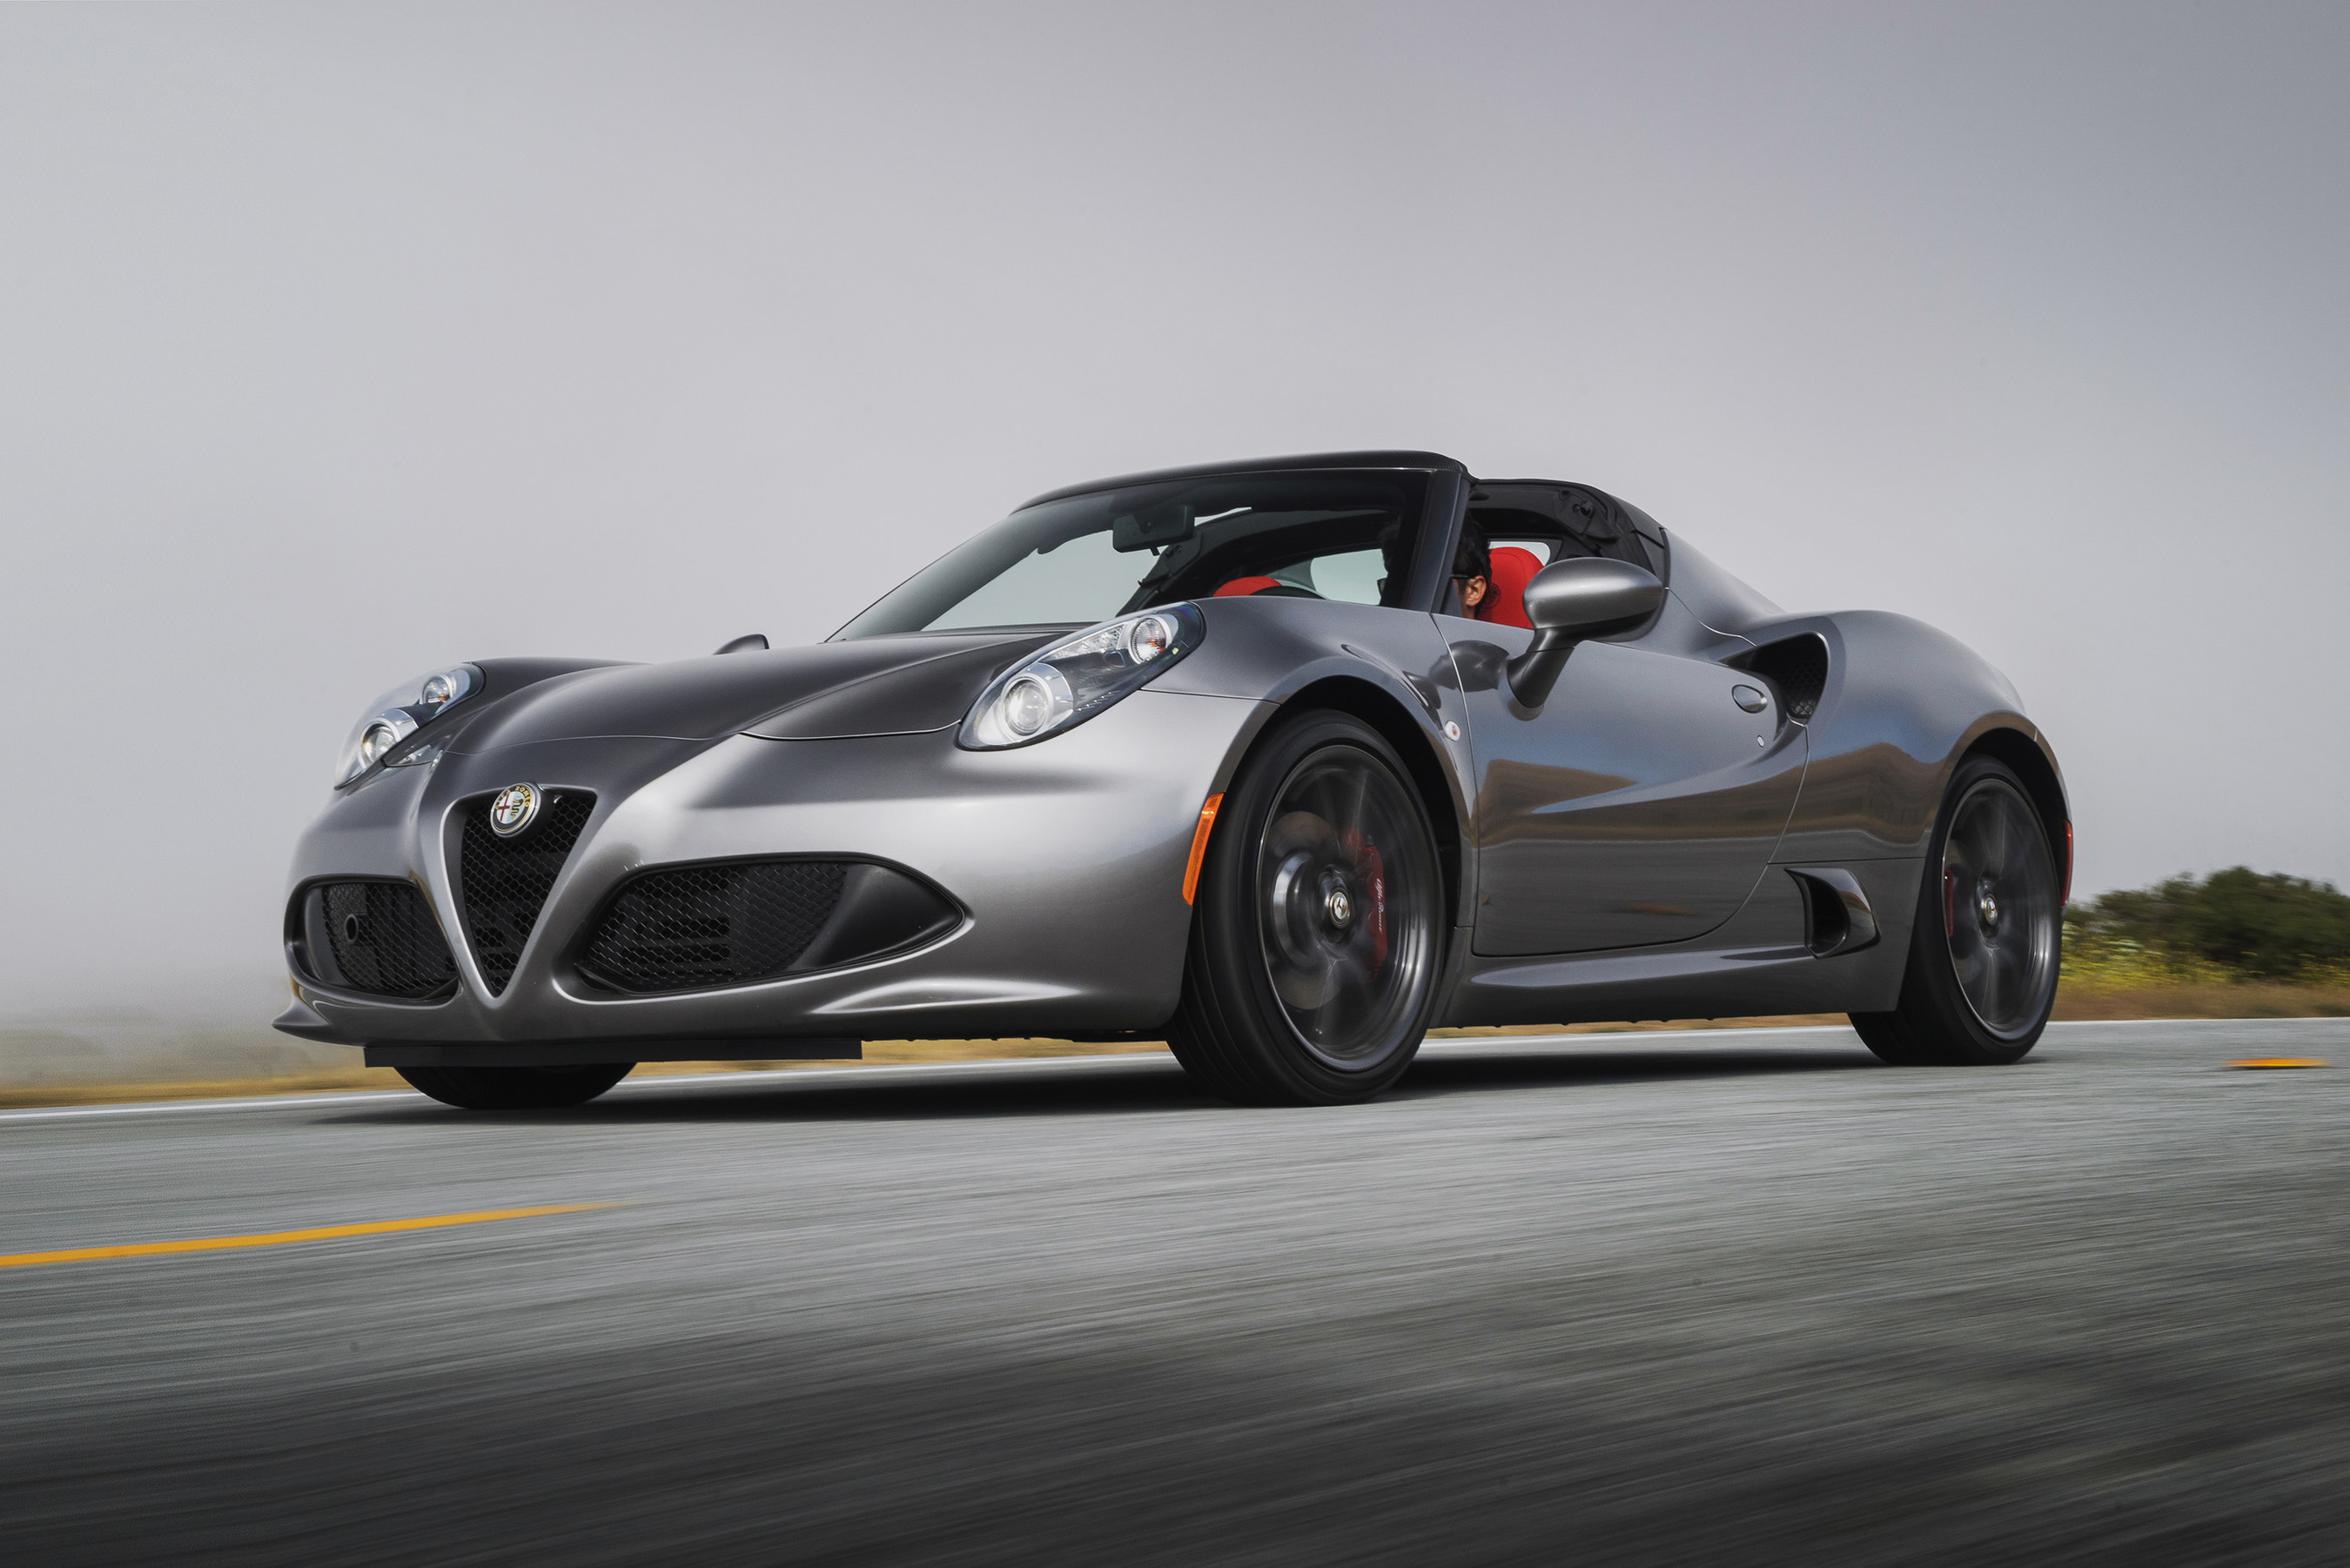 All-new 2015 Alfa Romeo 4C Spider Delivers Race-inspired Performance,  Advanced Technologies, Seductive Italian Style, and now an Even More  Exhilarating Driving Experience With Open-air Freedom